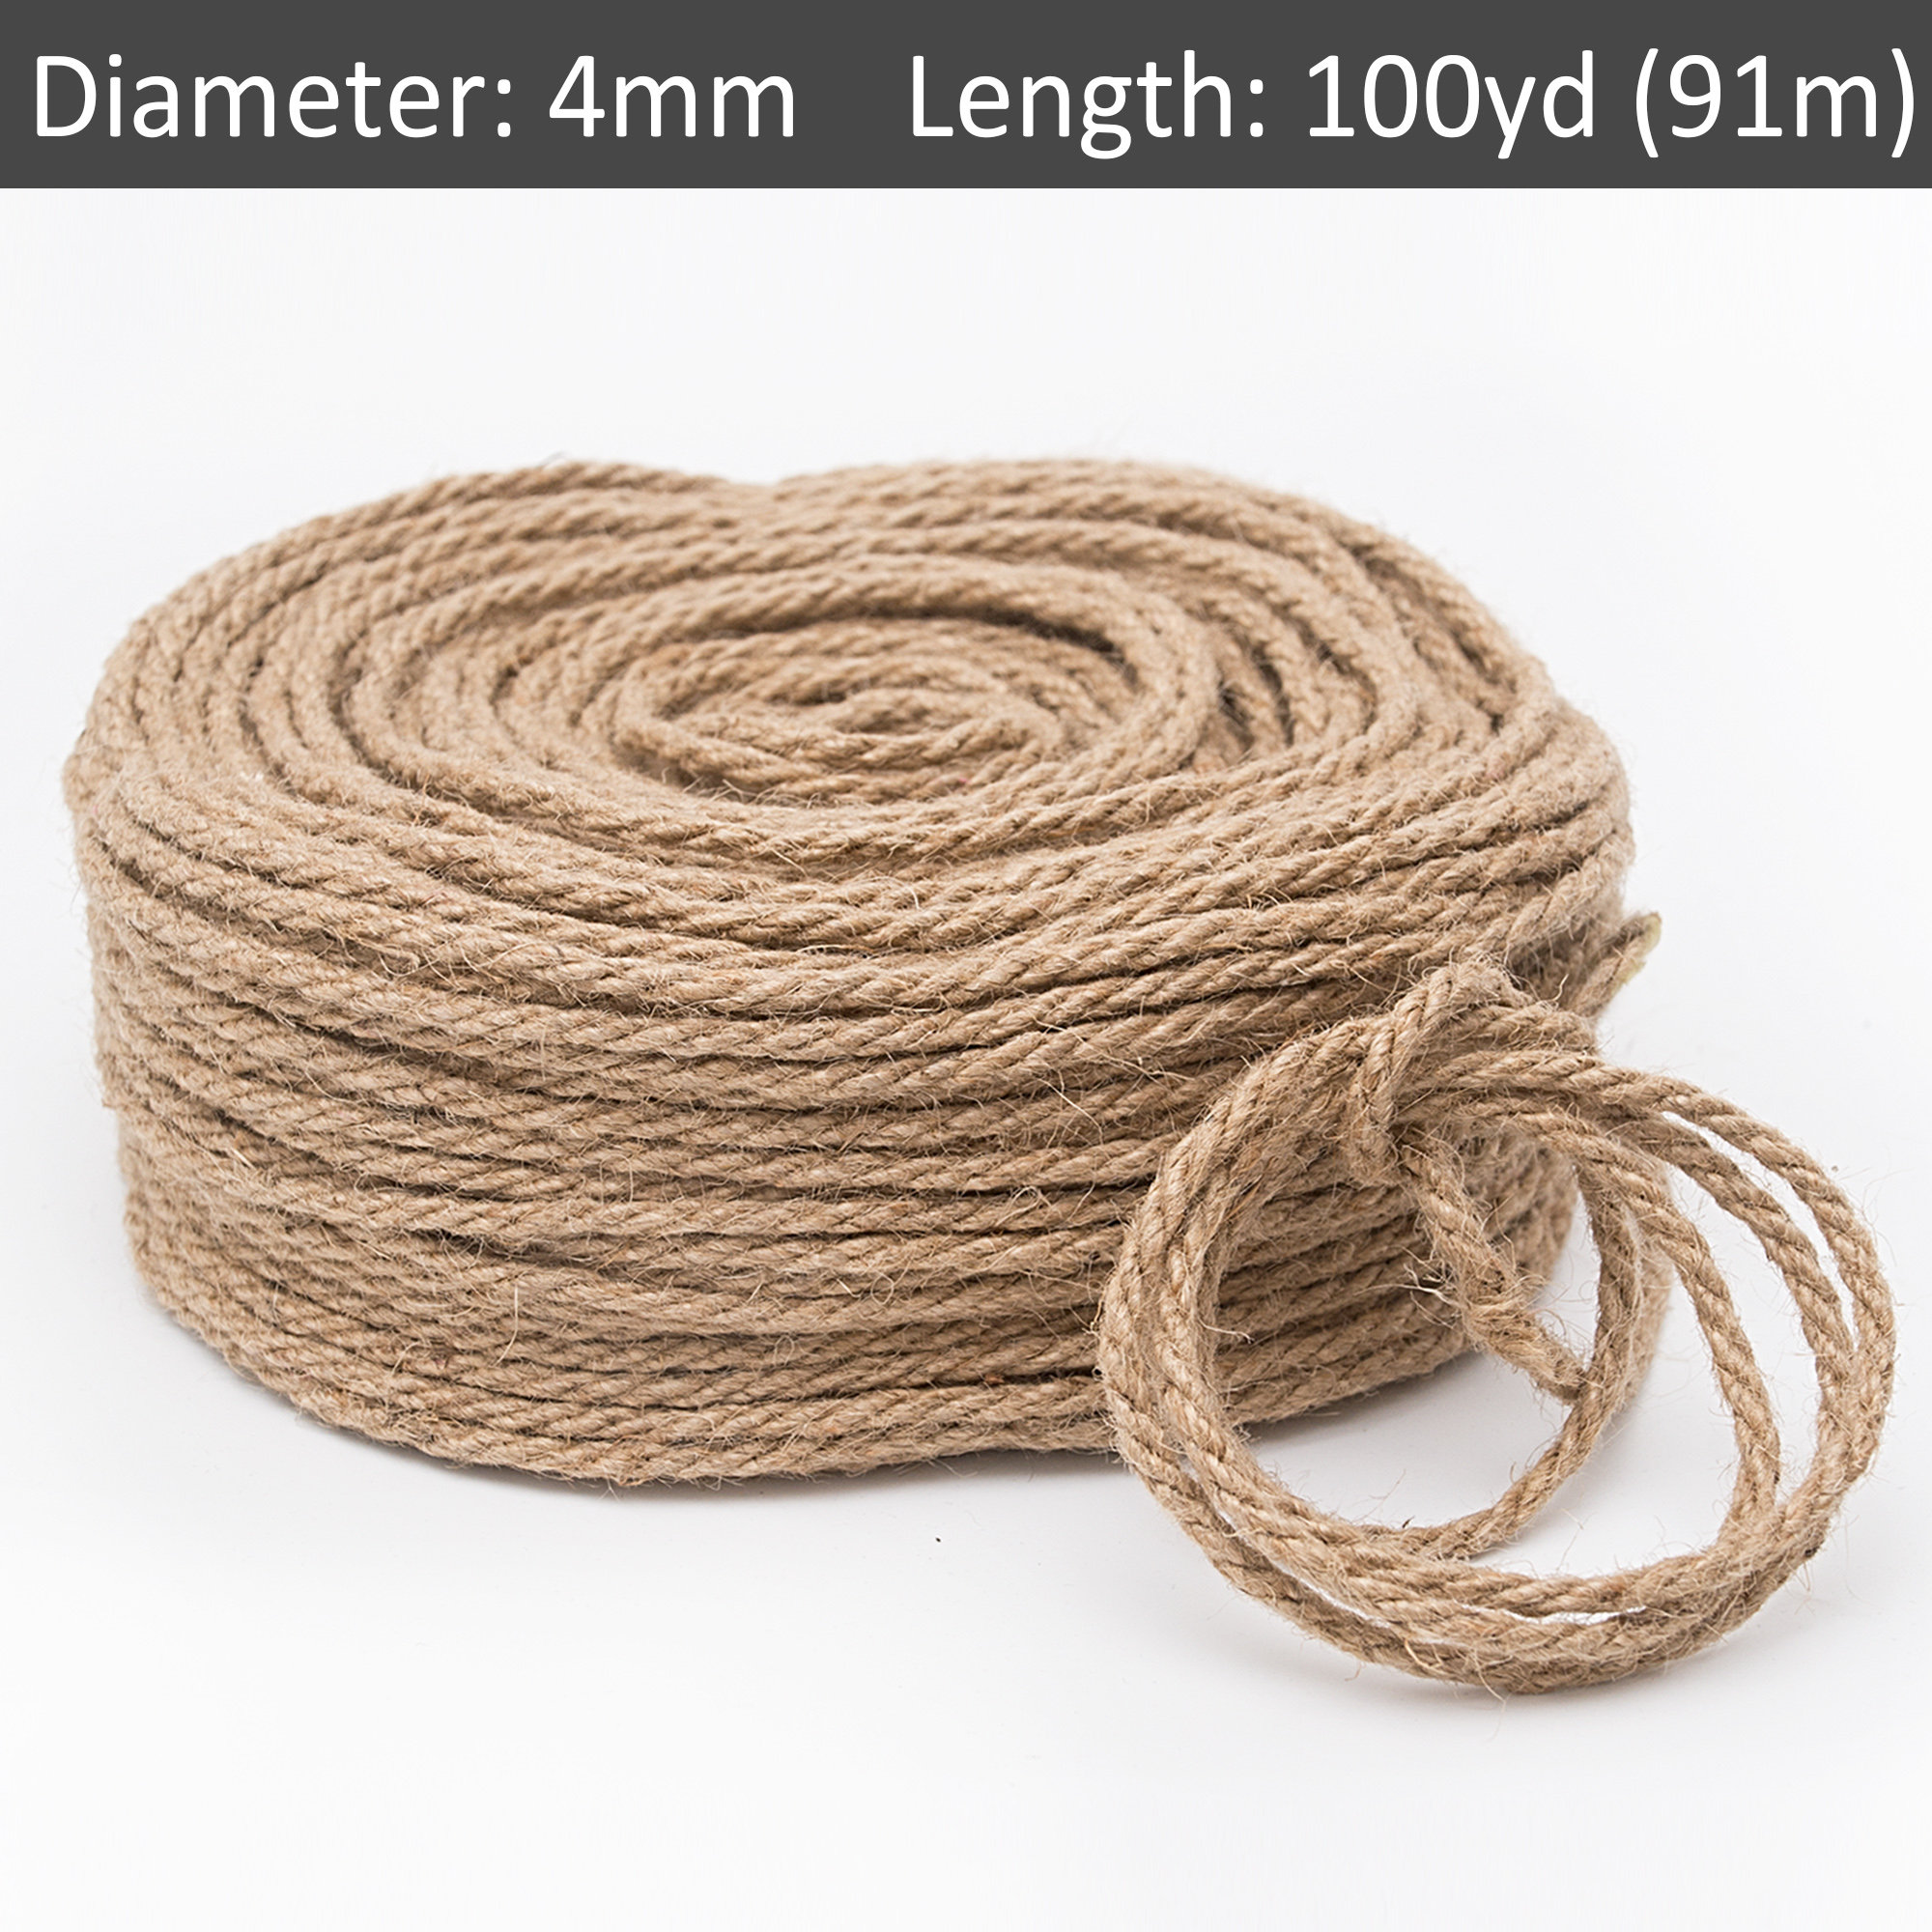 26 Gauge Green Cotton Covered Floral Wire 80 Feet per Bundle 24.4m